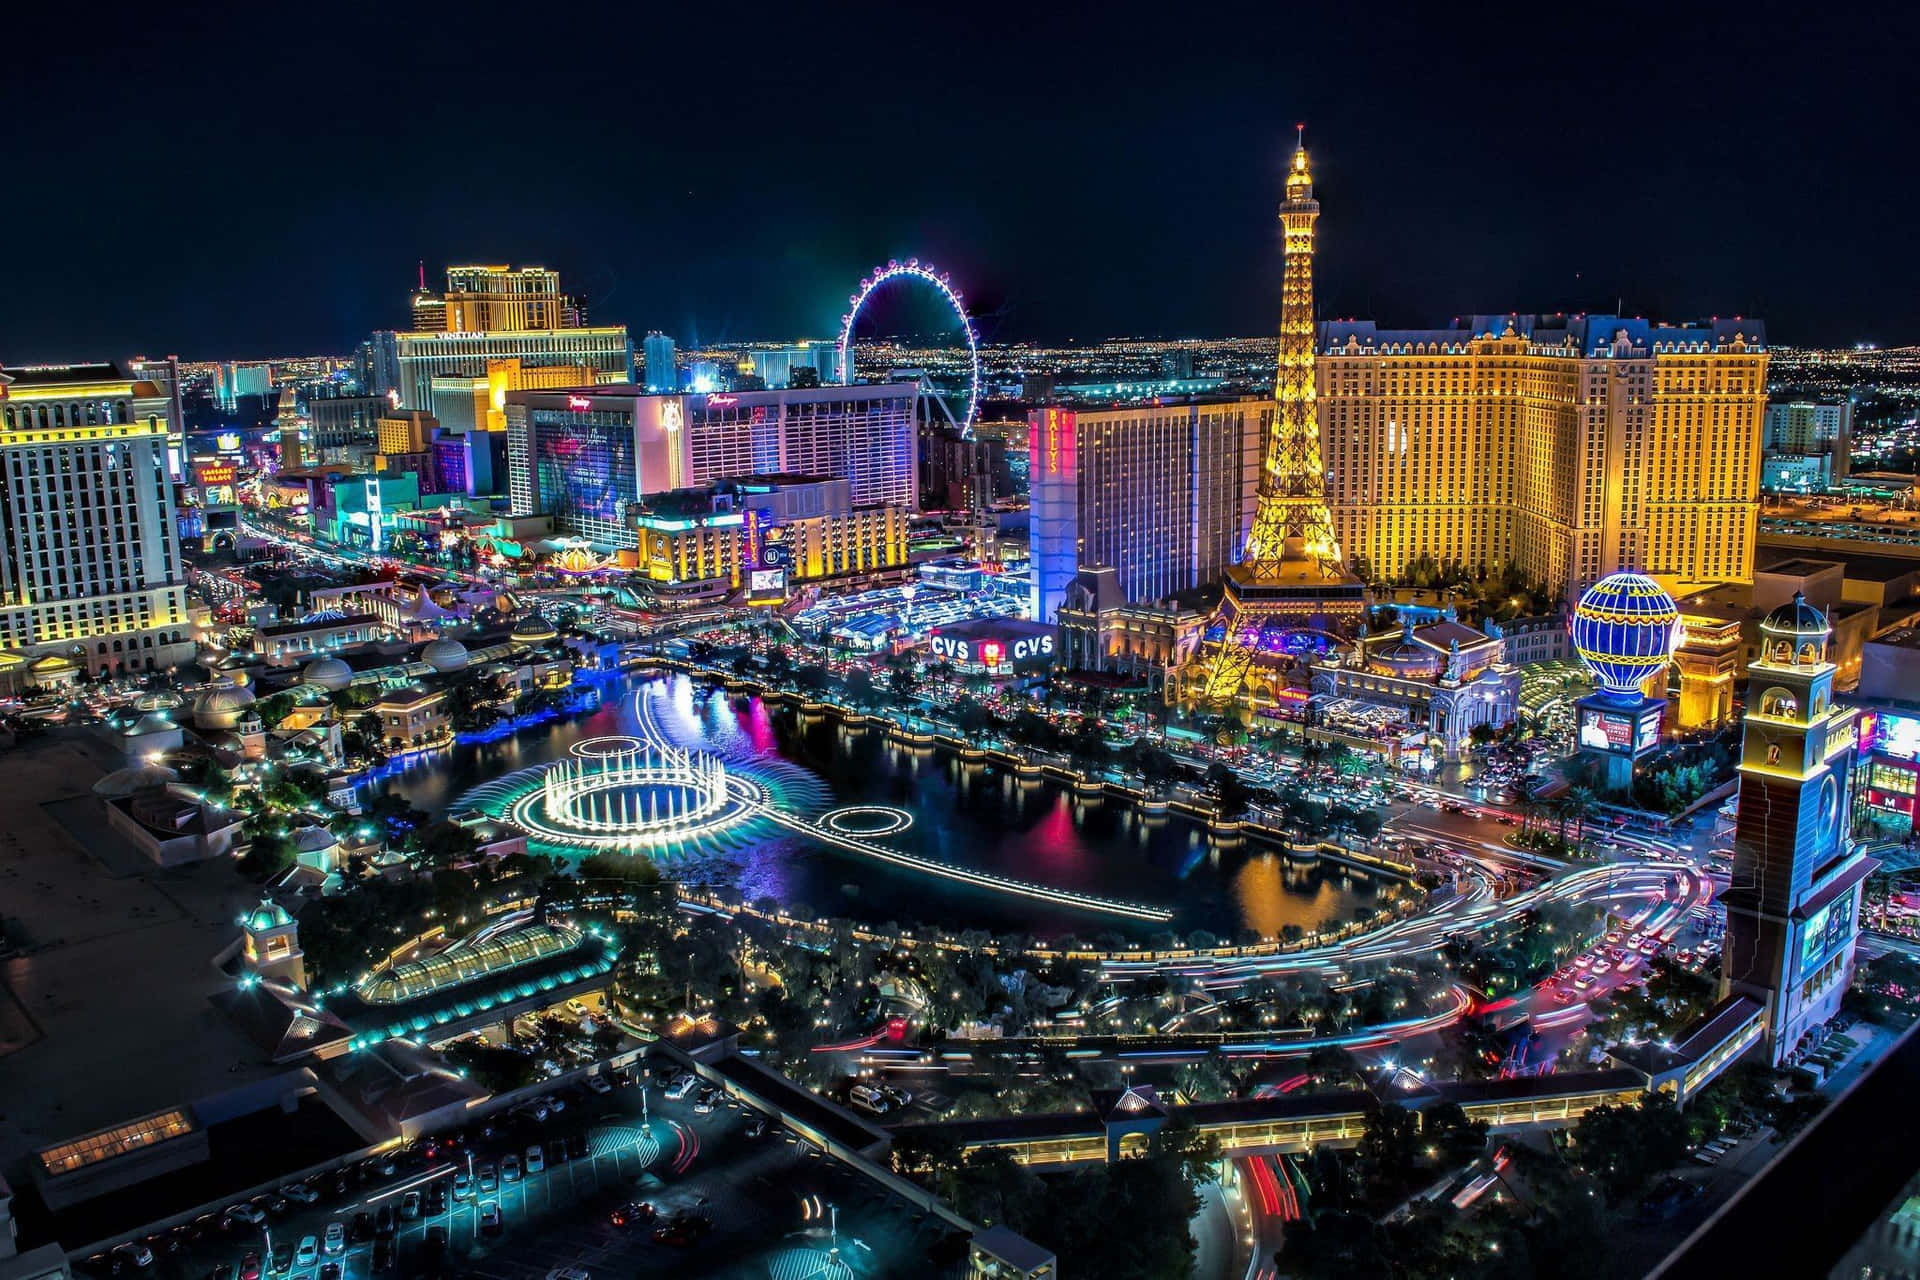 A birds-eye view of the spectacular skyline of Las Vegas at dusk Wallpaper